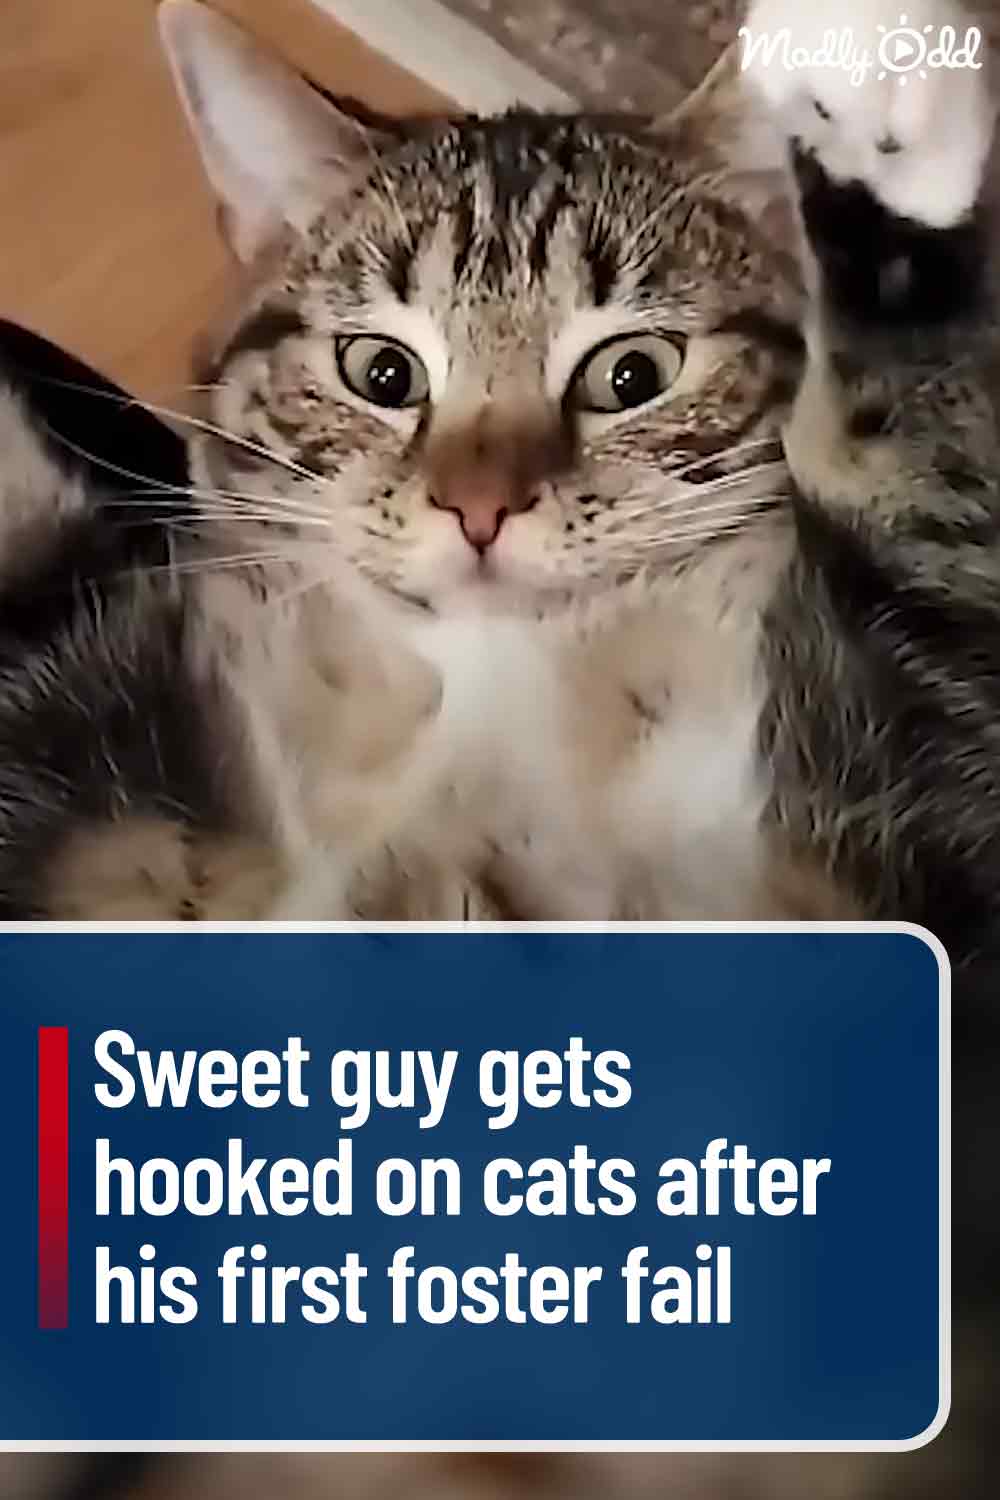 Sweet guy gets hooked on cats after his first foster fail